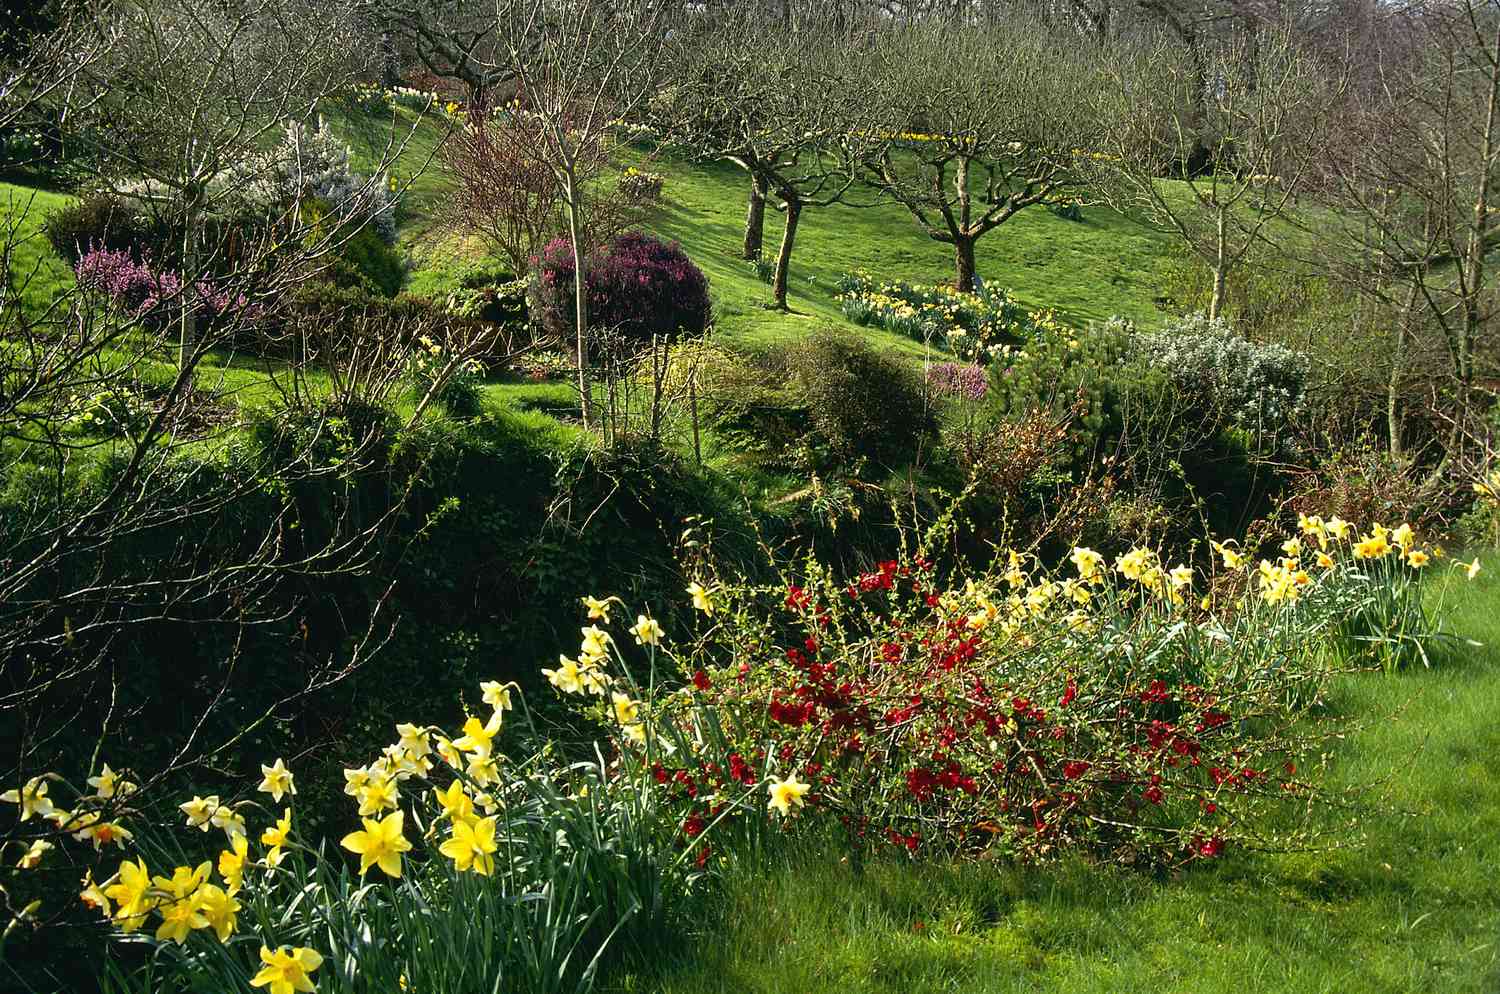 spring garden early spring grassy bank, chaenomeles speciosa, narcissus, view to erica bed & orchard trees, march, docton mill, devon